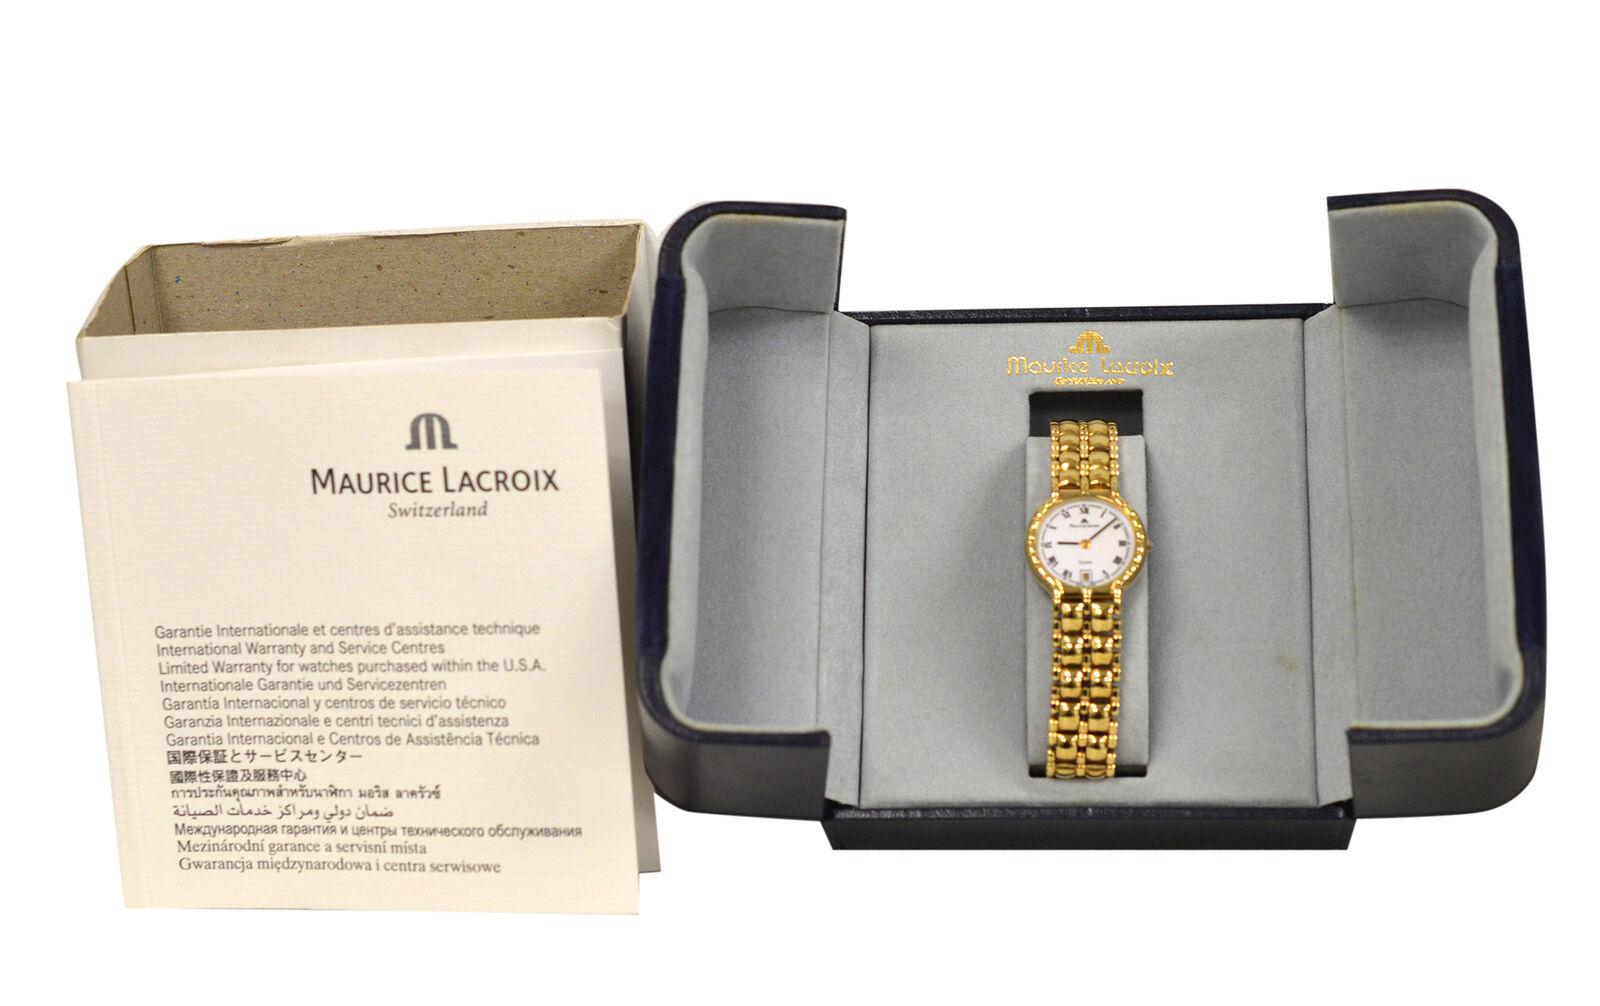 Brand	Maurice Lacroix
Model	78950
Gender	Ladies'
Condition	New Old Stock Store display
Movement	Swiss Quartz
Case Material	Gold Electroplated Stainless Steel
Bracelet / Strap Material	
Gold Electroplated Stainless Steel

Clasp / Buckle